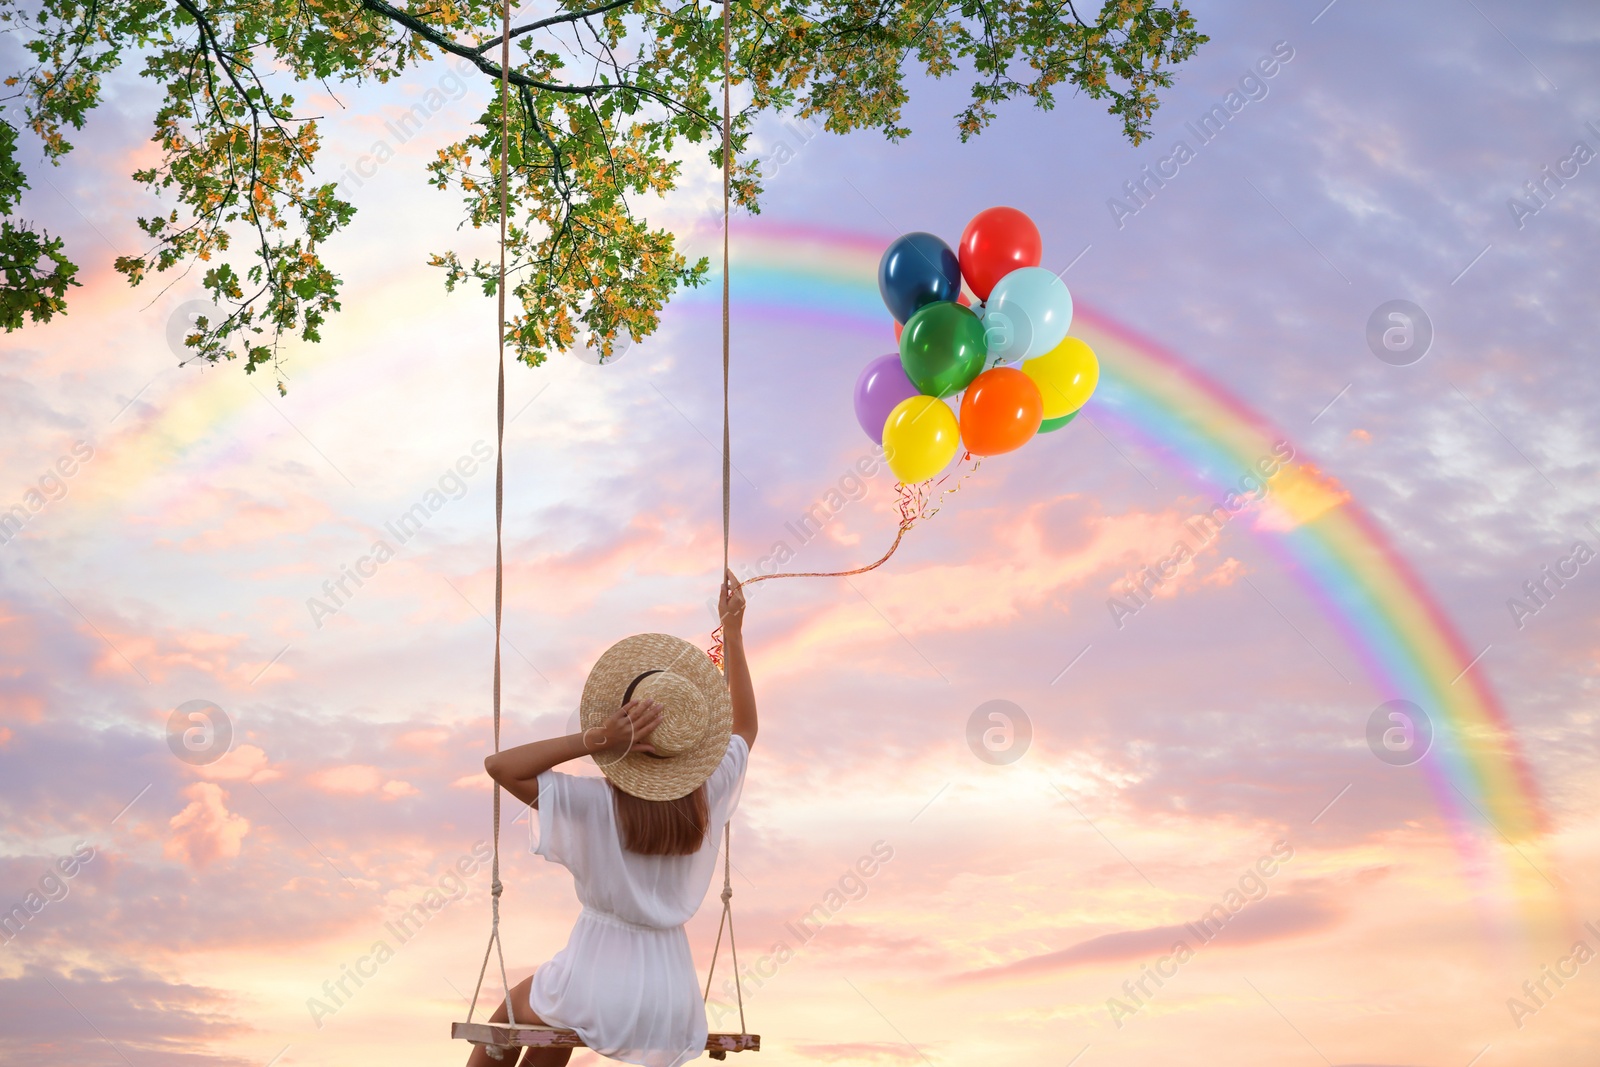 Image of Dream world. Young woman with bright balloons swinging, rainbow in sunset sky on background